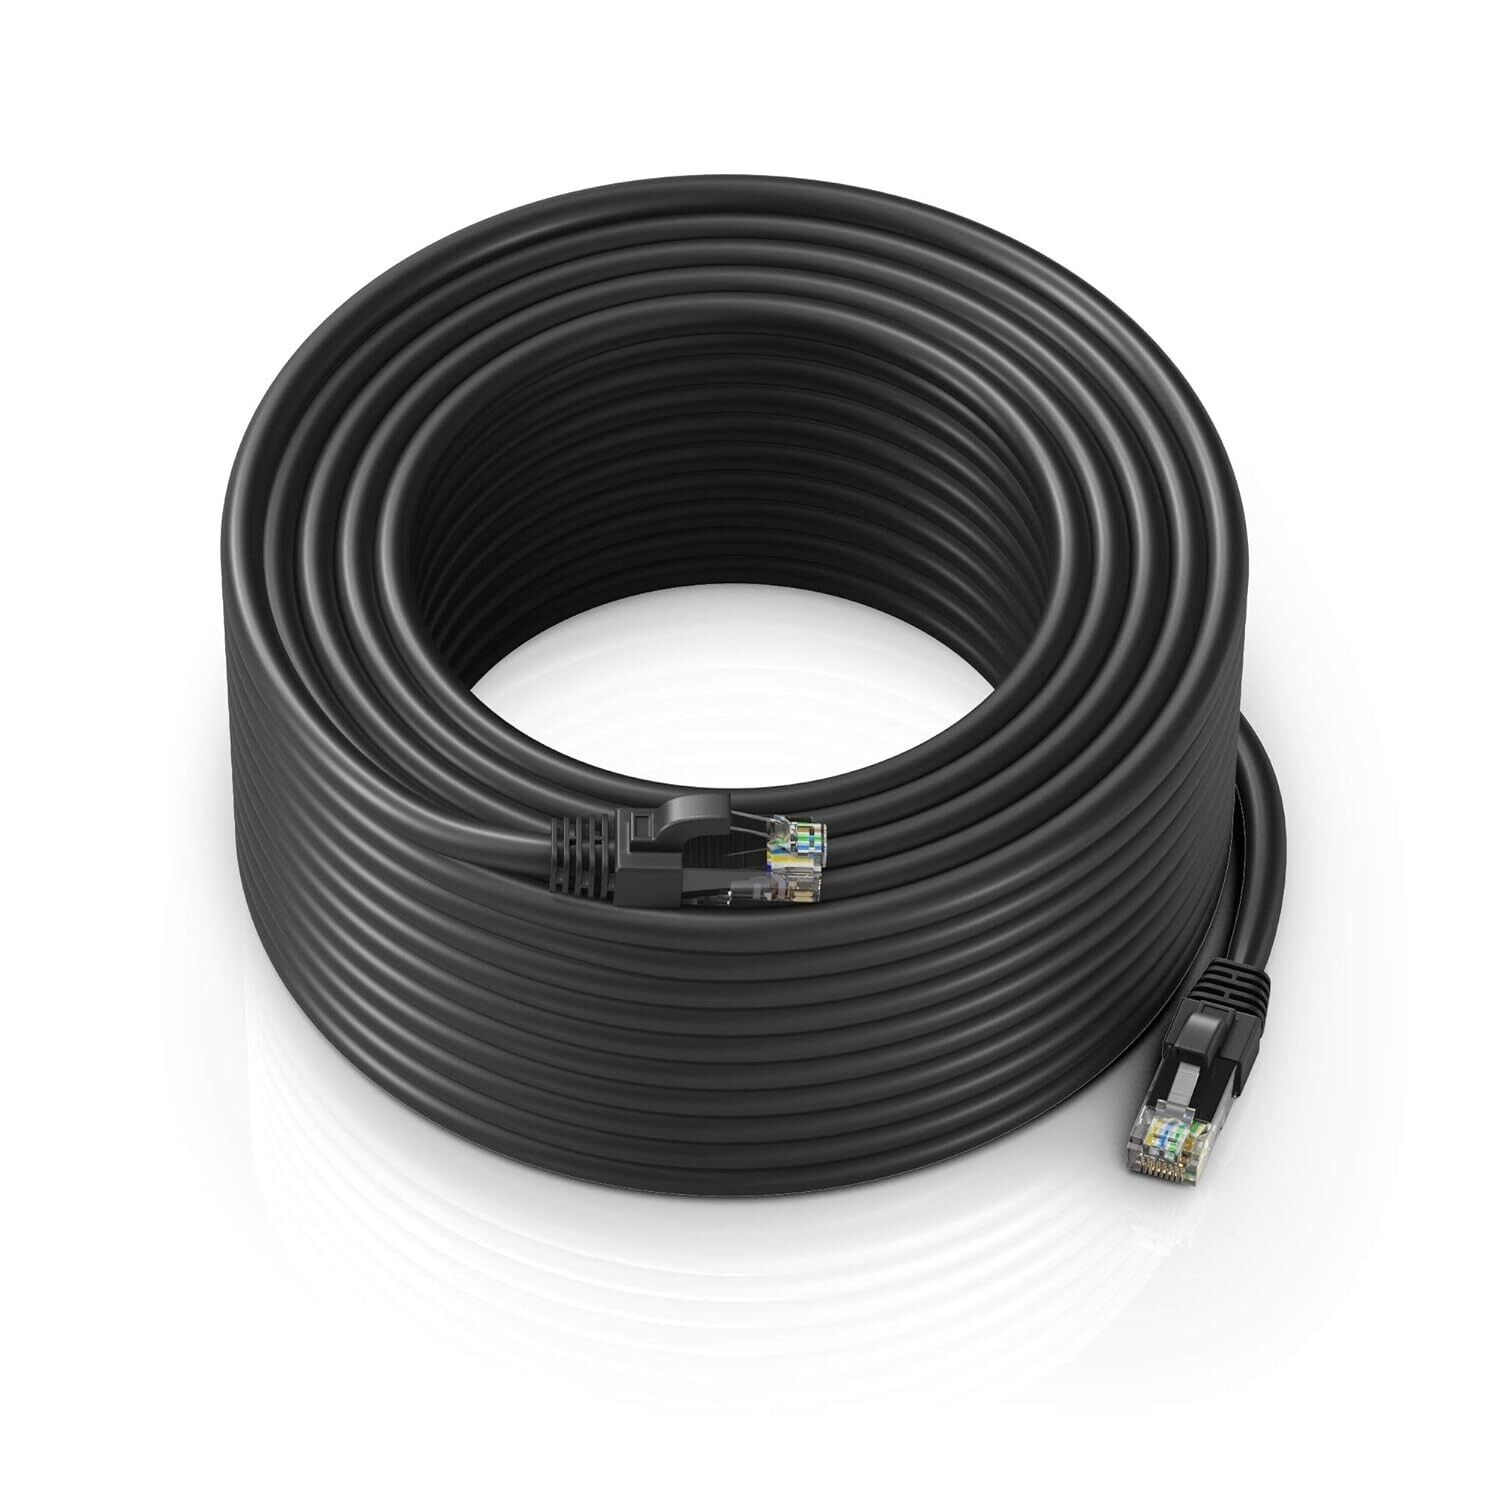 Ethernet Cable 200 Ft CAT6 High Speed Internet Network LAN Cable Cord Outdoor